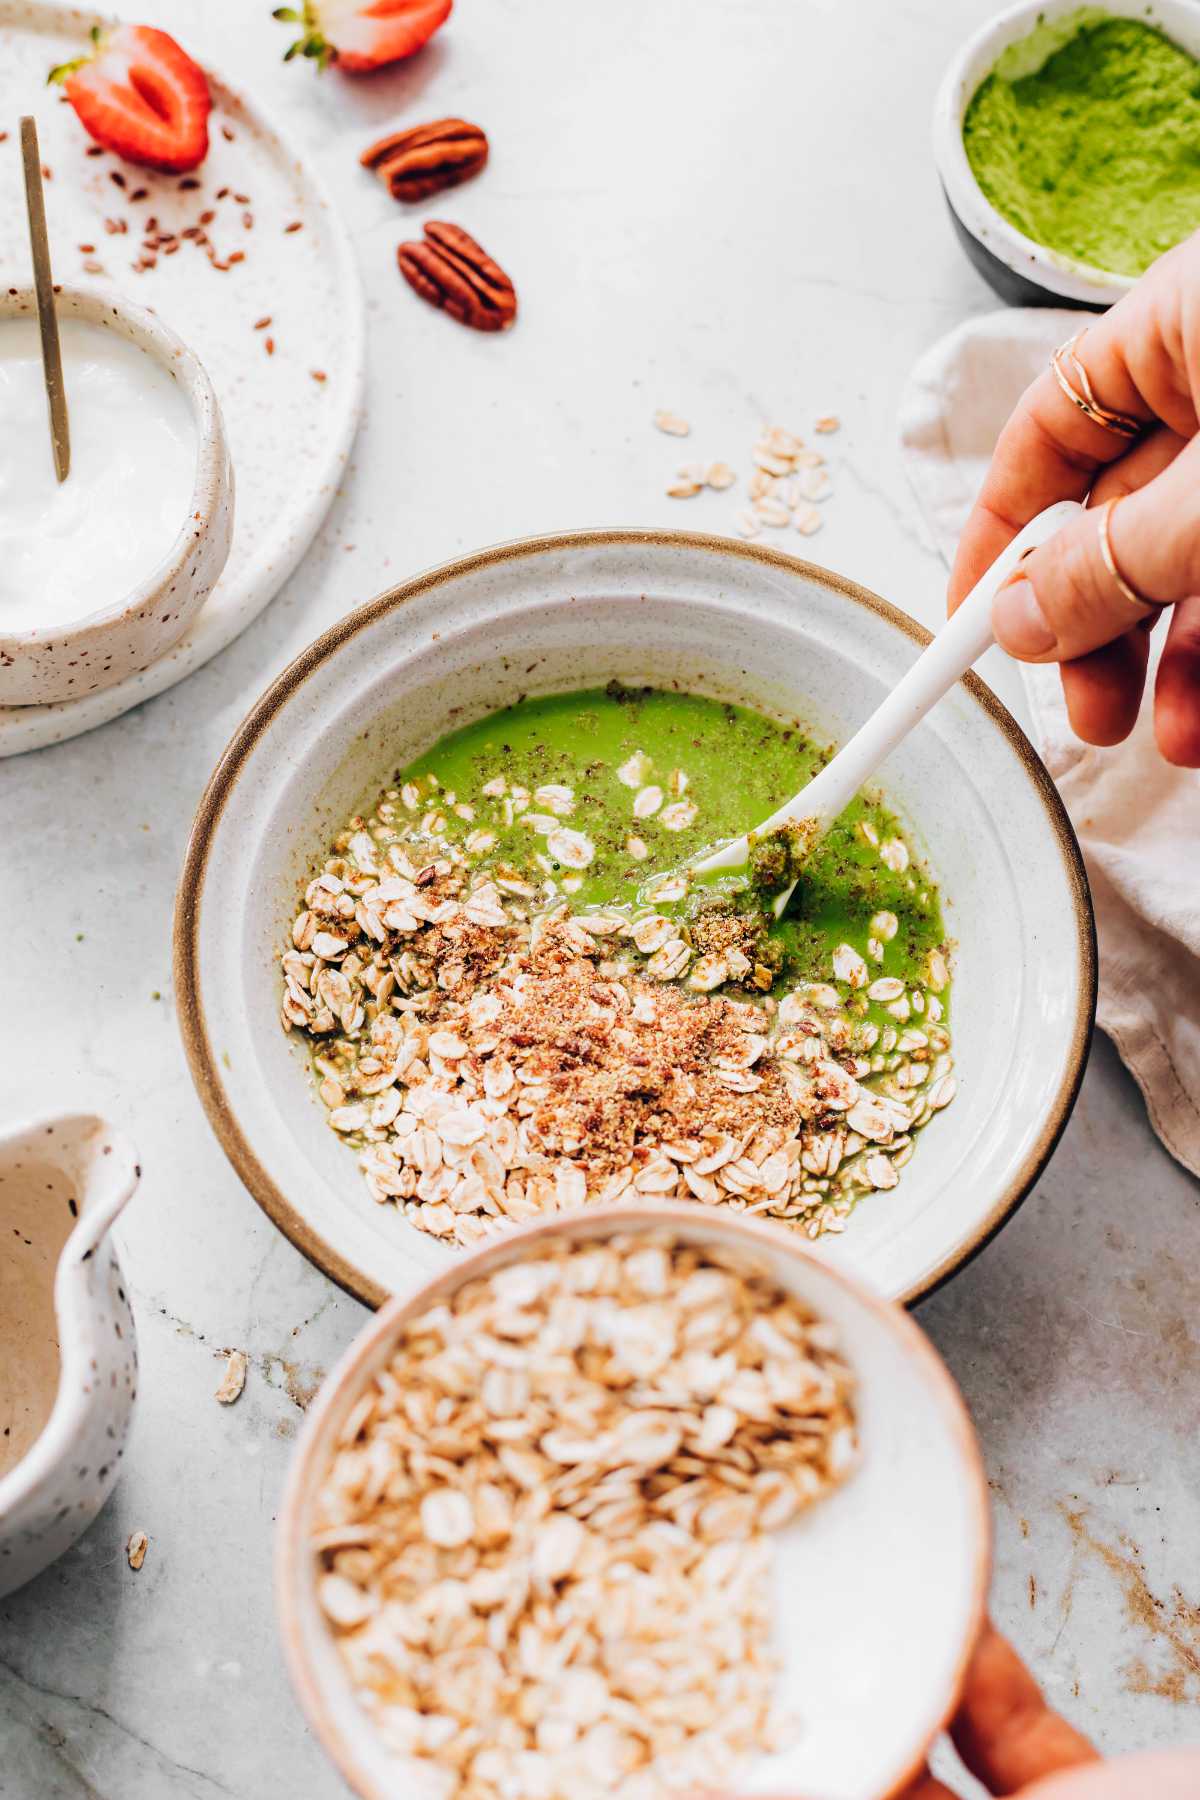 adding oats to matcha milk mixture with a spoon